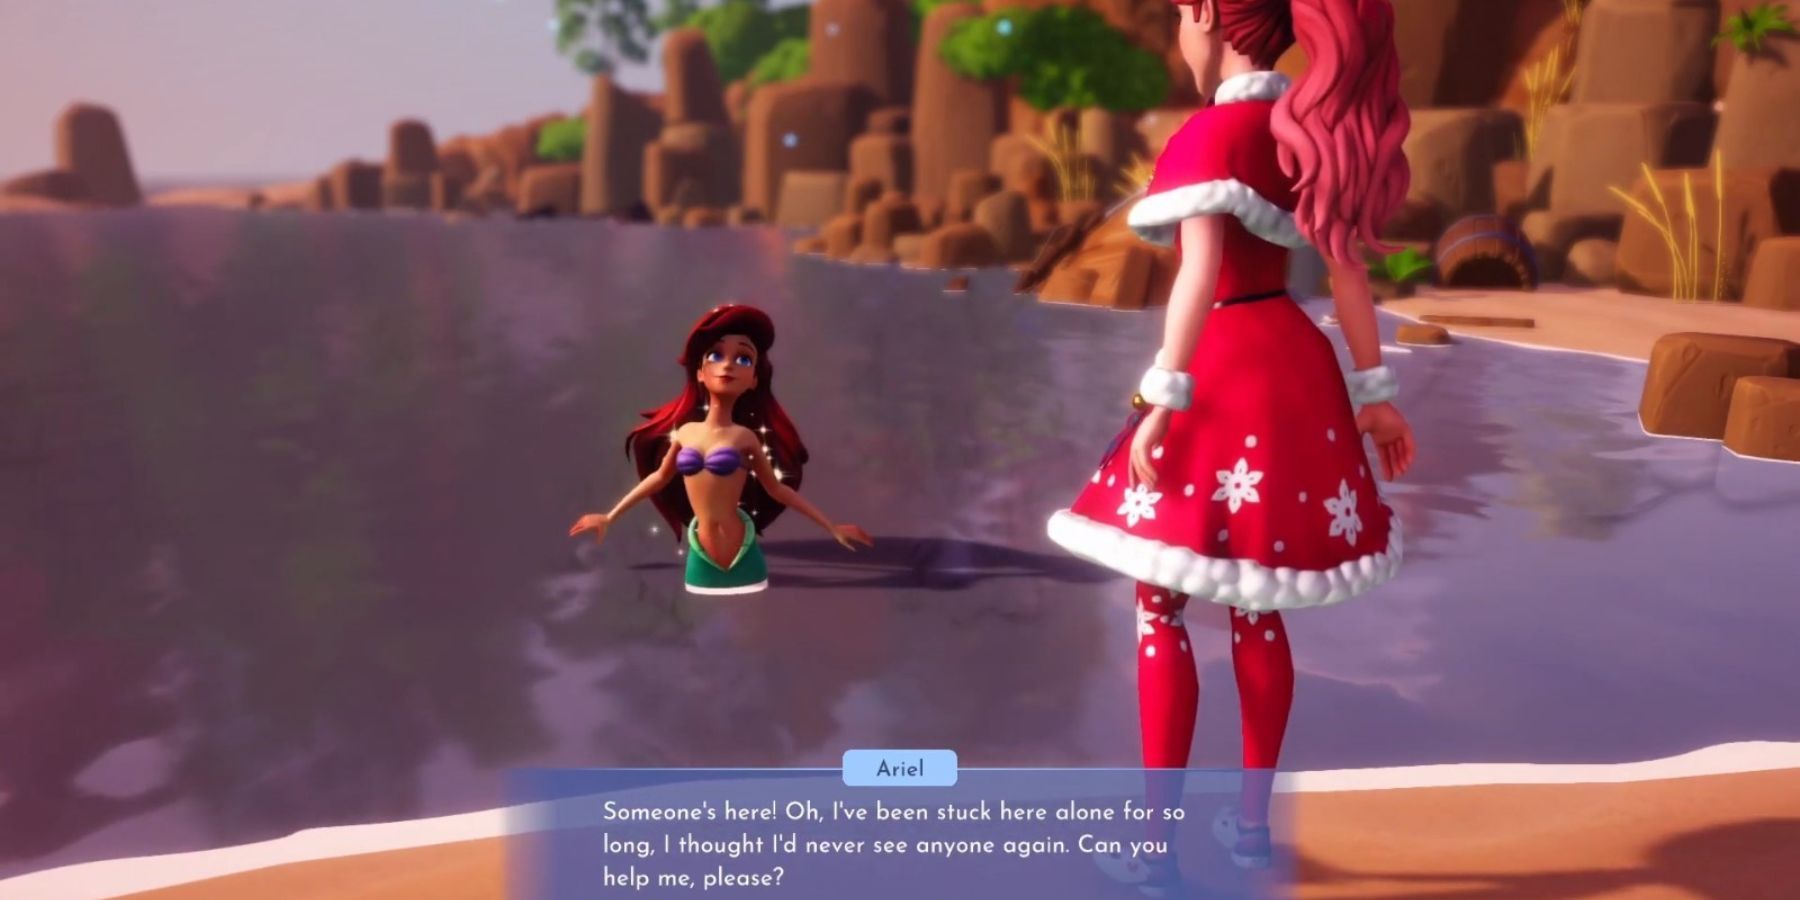 ariel asking for help dreamlight valley